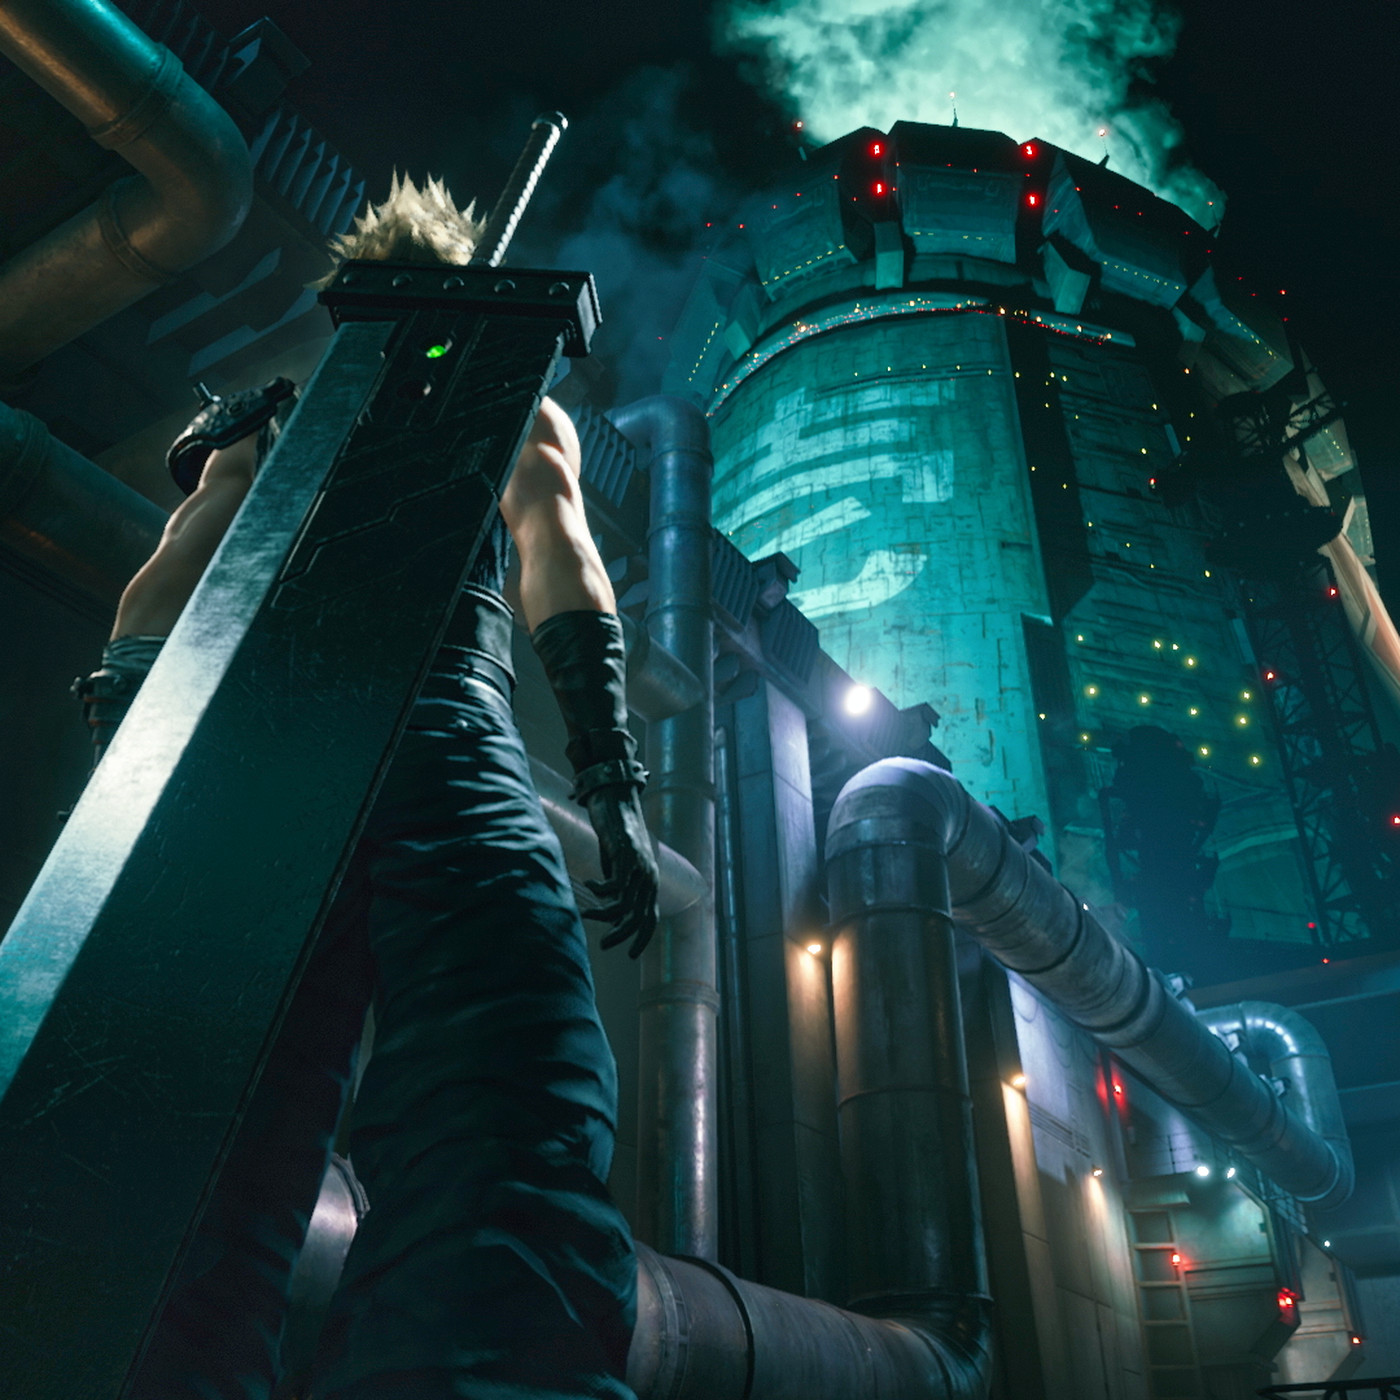 Final Fantasy VII Remake Intergrade is coming to PC on December 16th